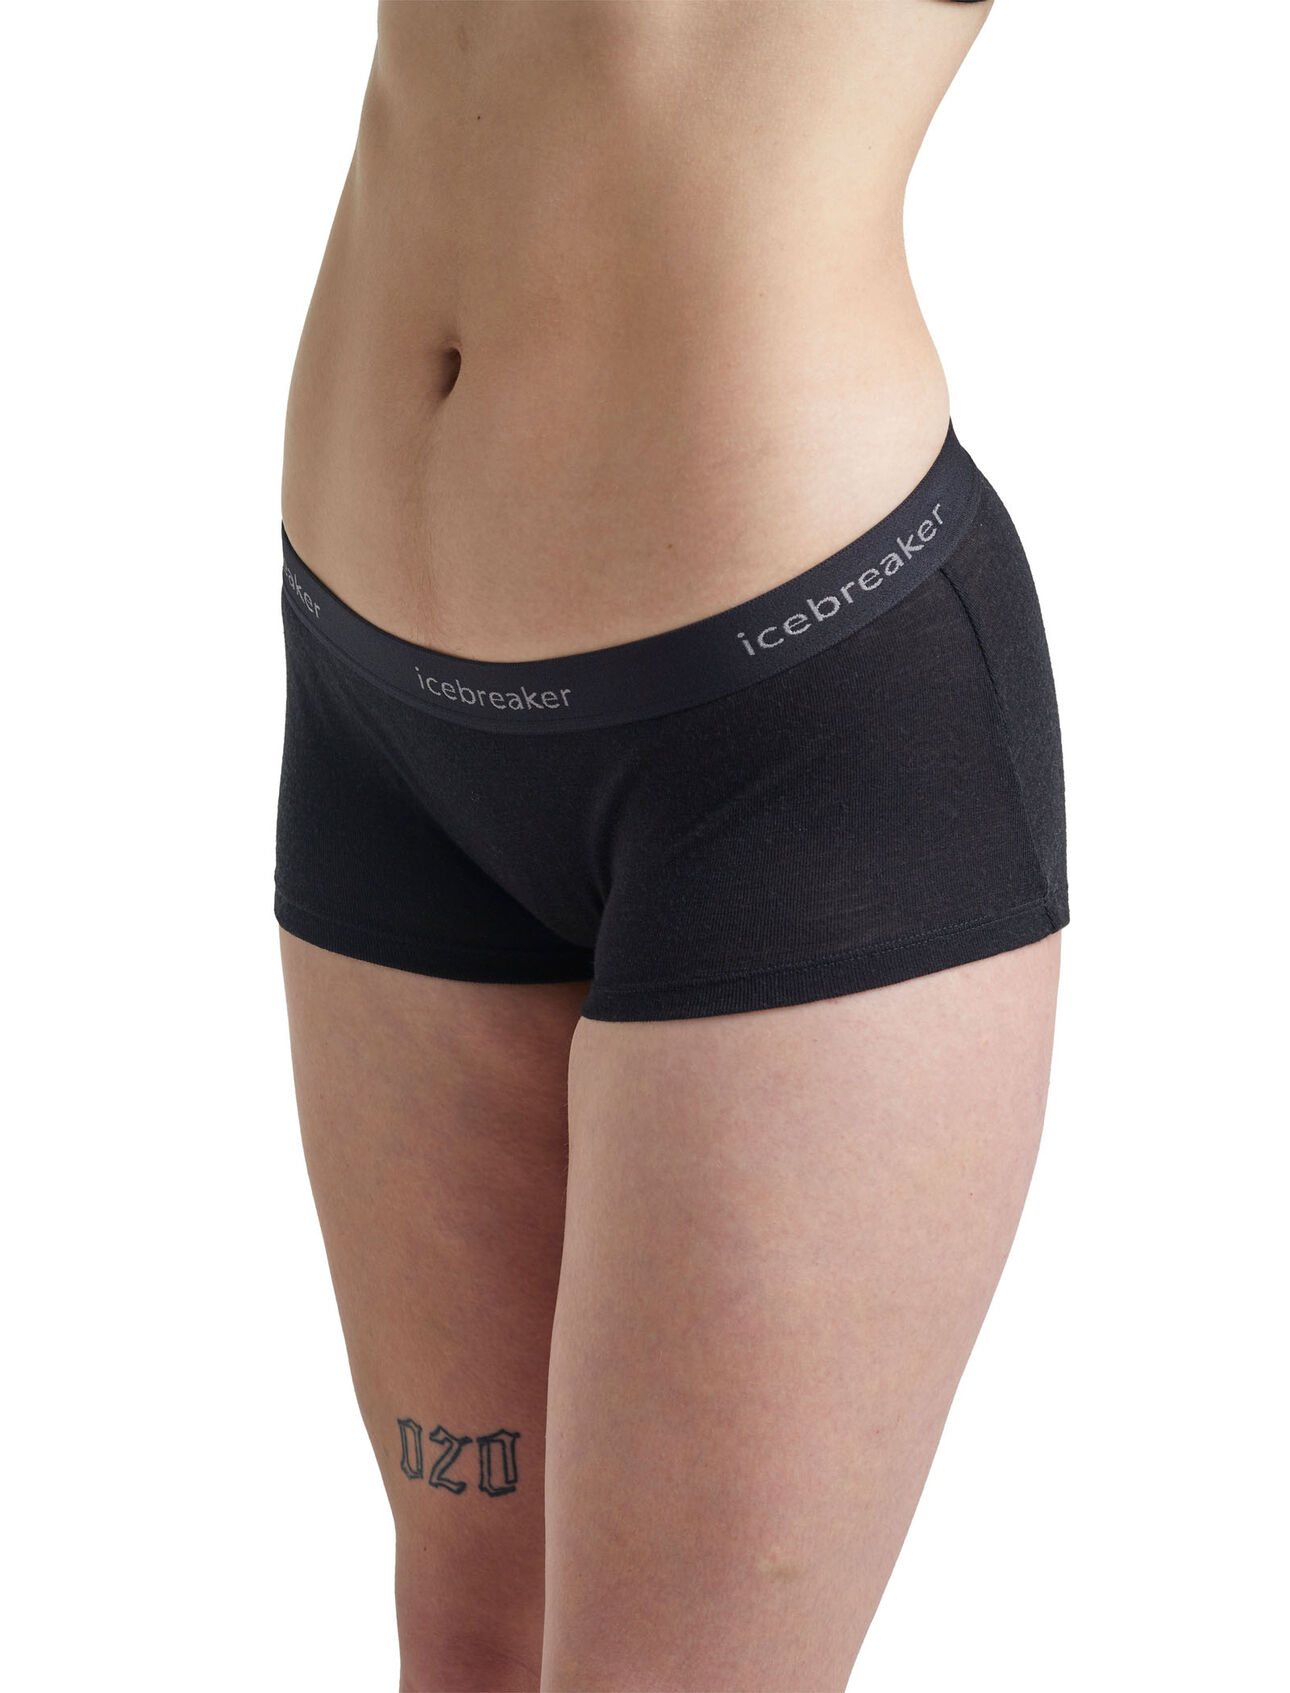 Womens Merino 175 Everyday Thermal Boy Shorts Made with 100% merino wool, the slim-fit 175 Everyday Boy Shorts are soft, breathable, go-to underwear for any day, anywhere.